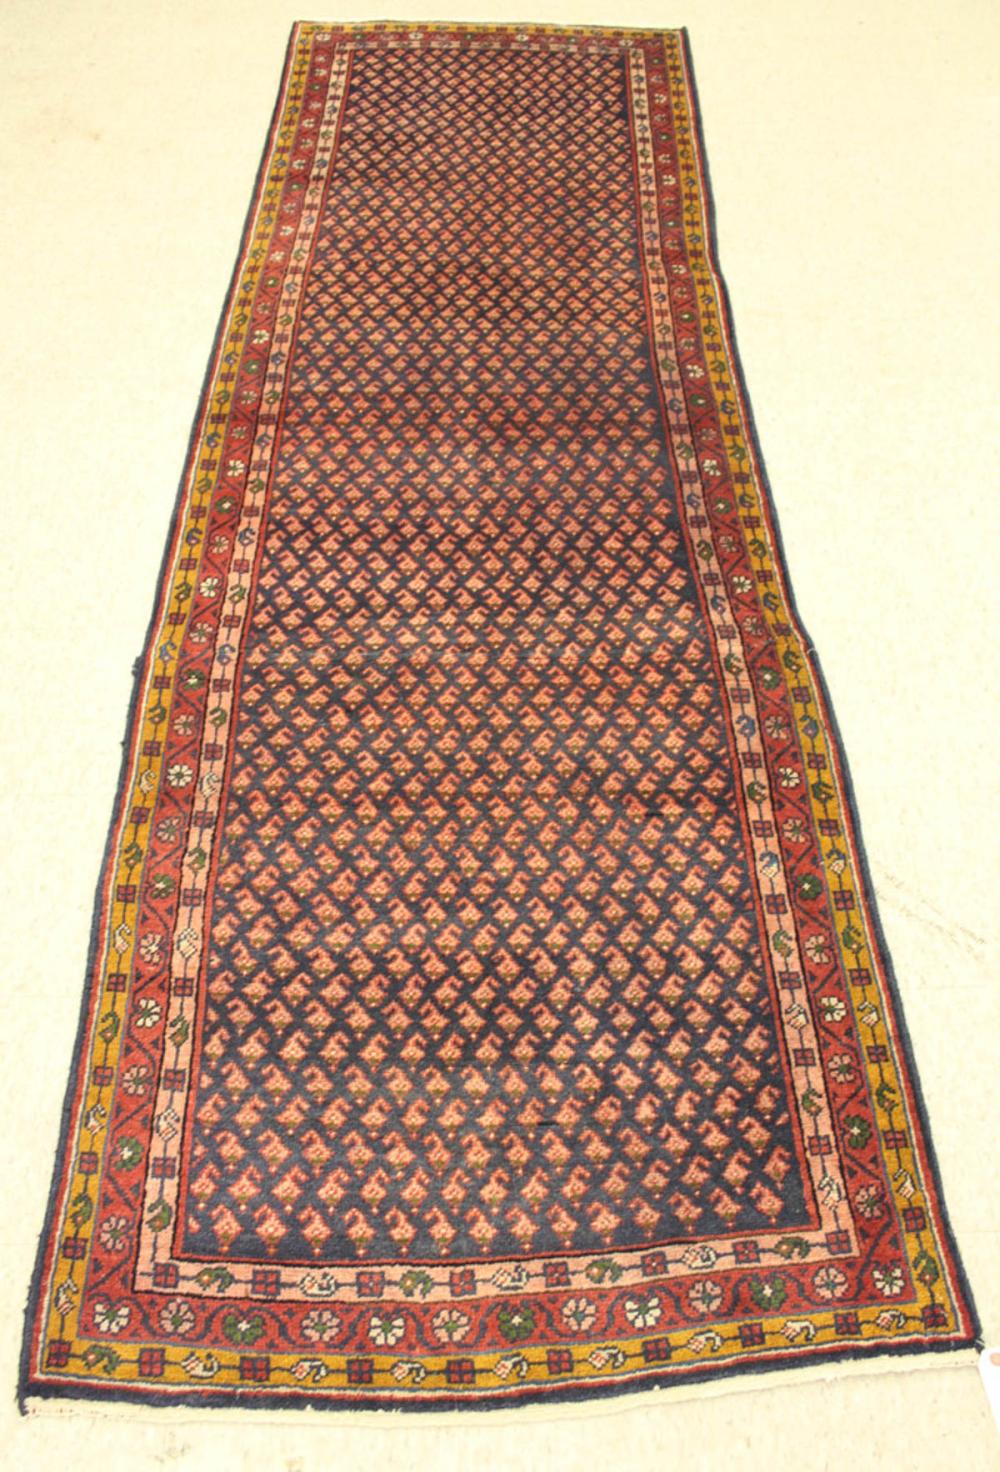 HAND KNOTTED PERSIAN CARPET MIR 33f064